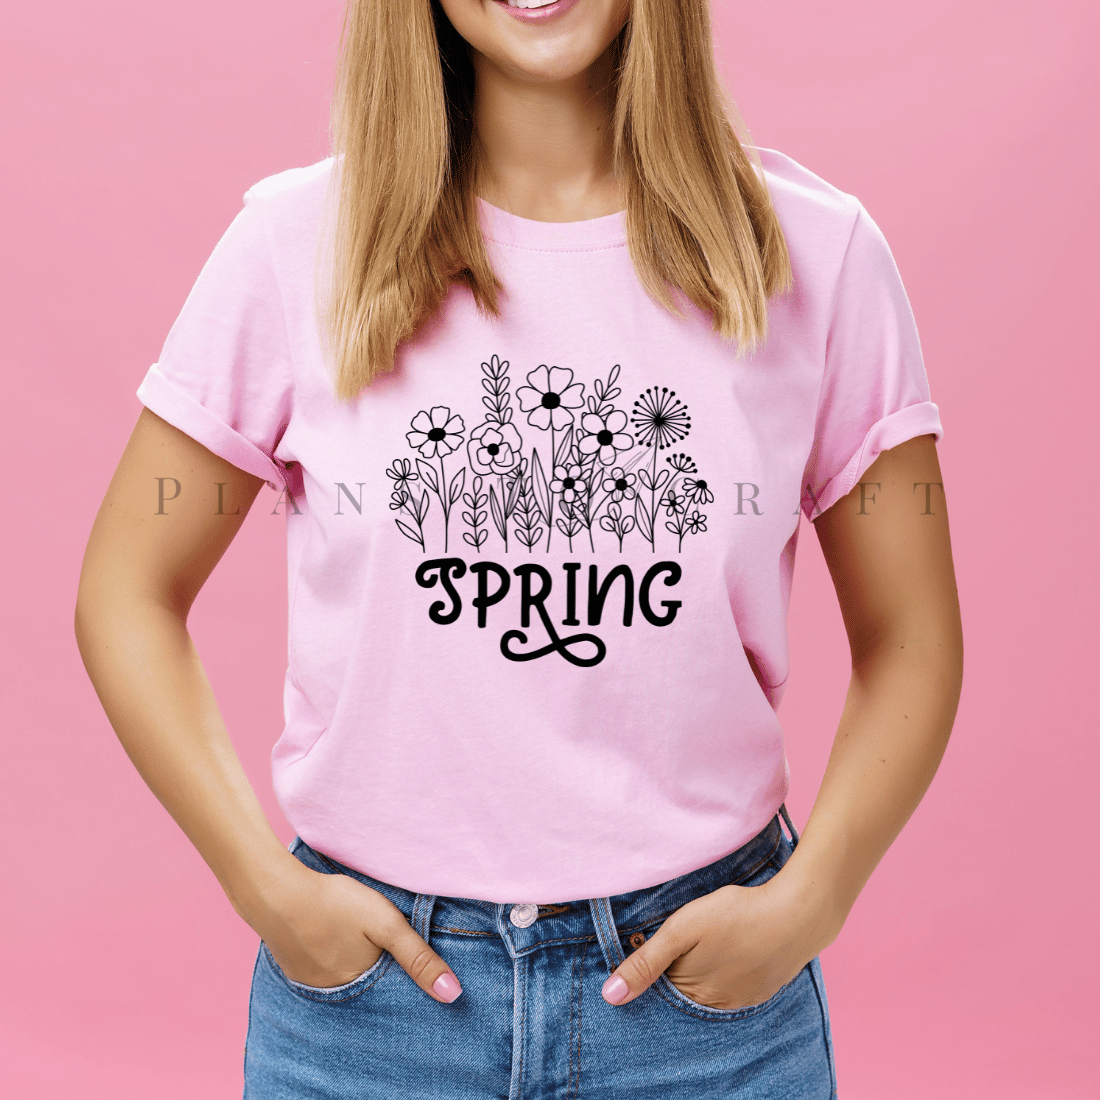 Woman wearing a pink shirt that says spring.